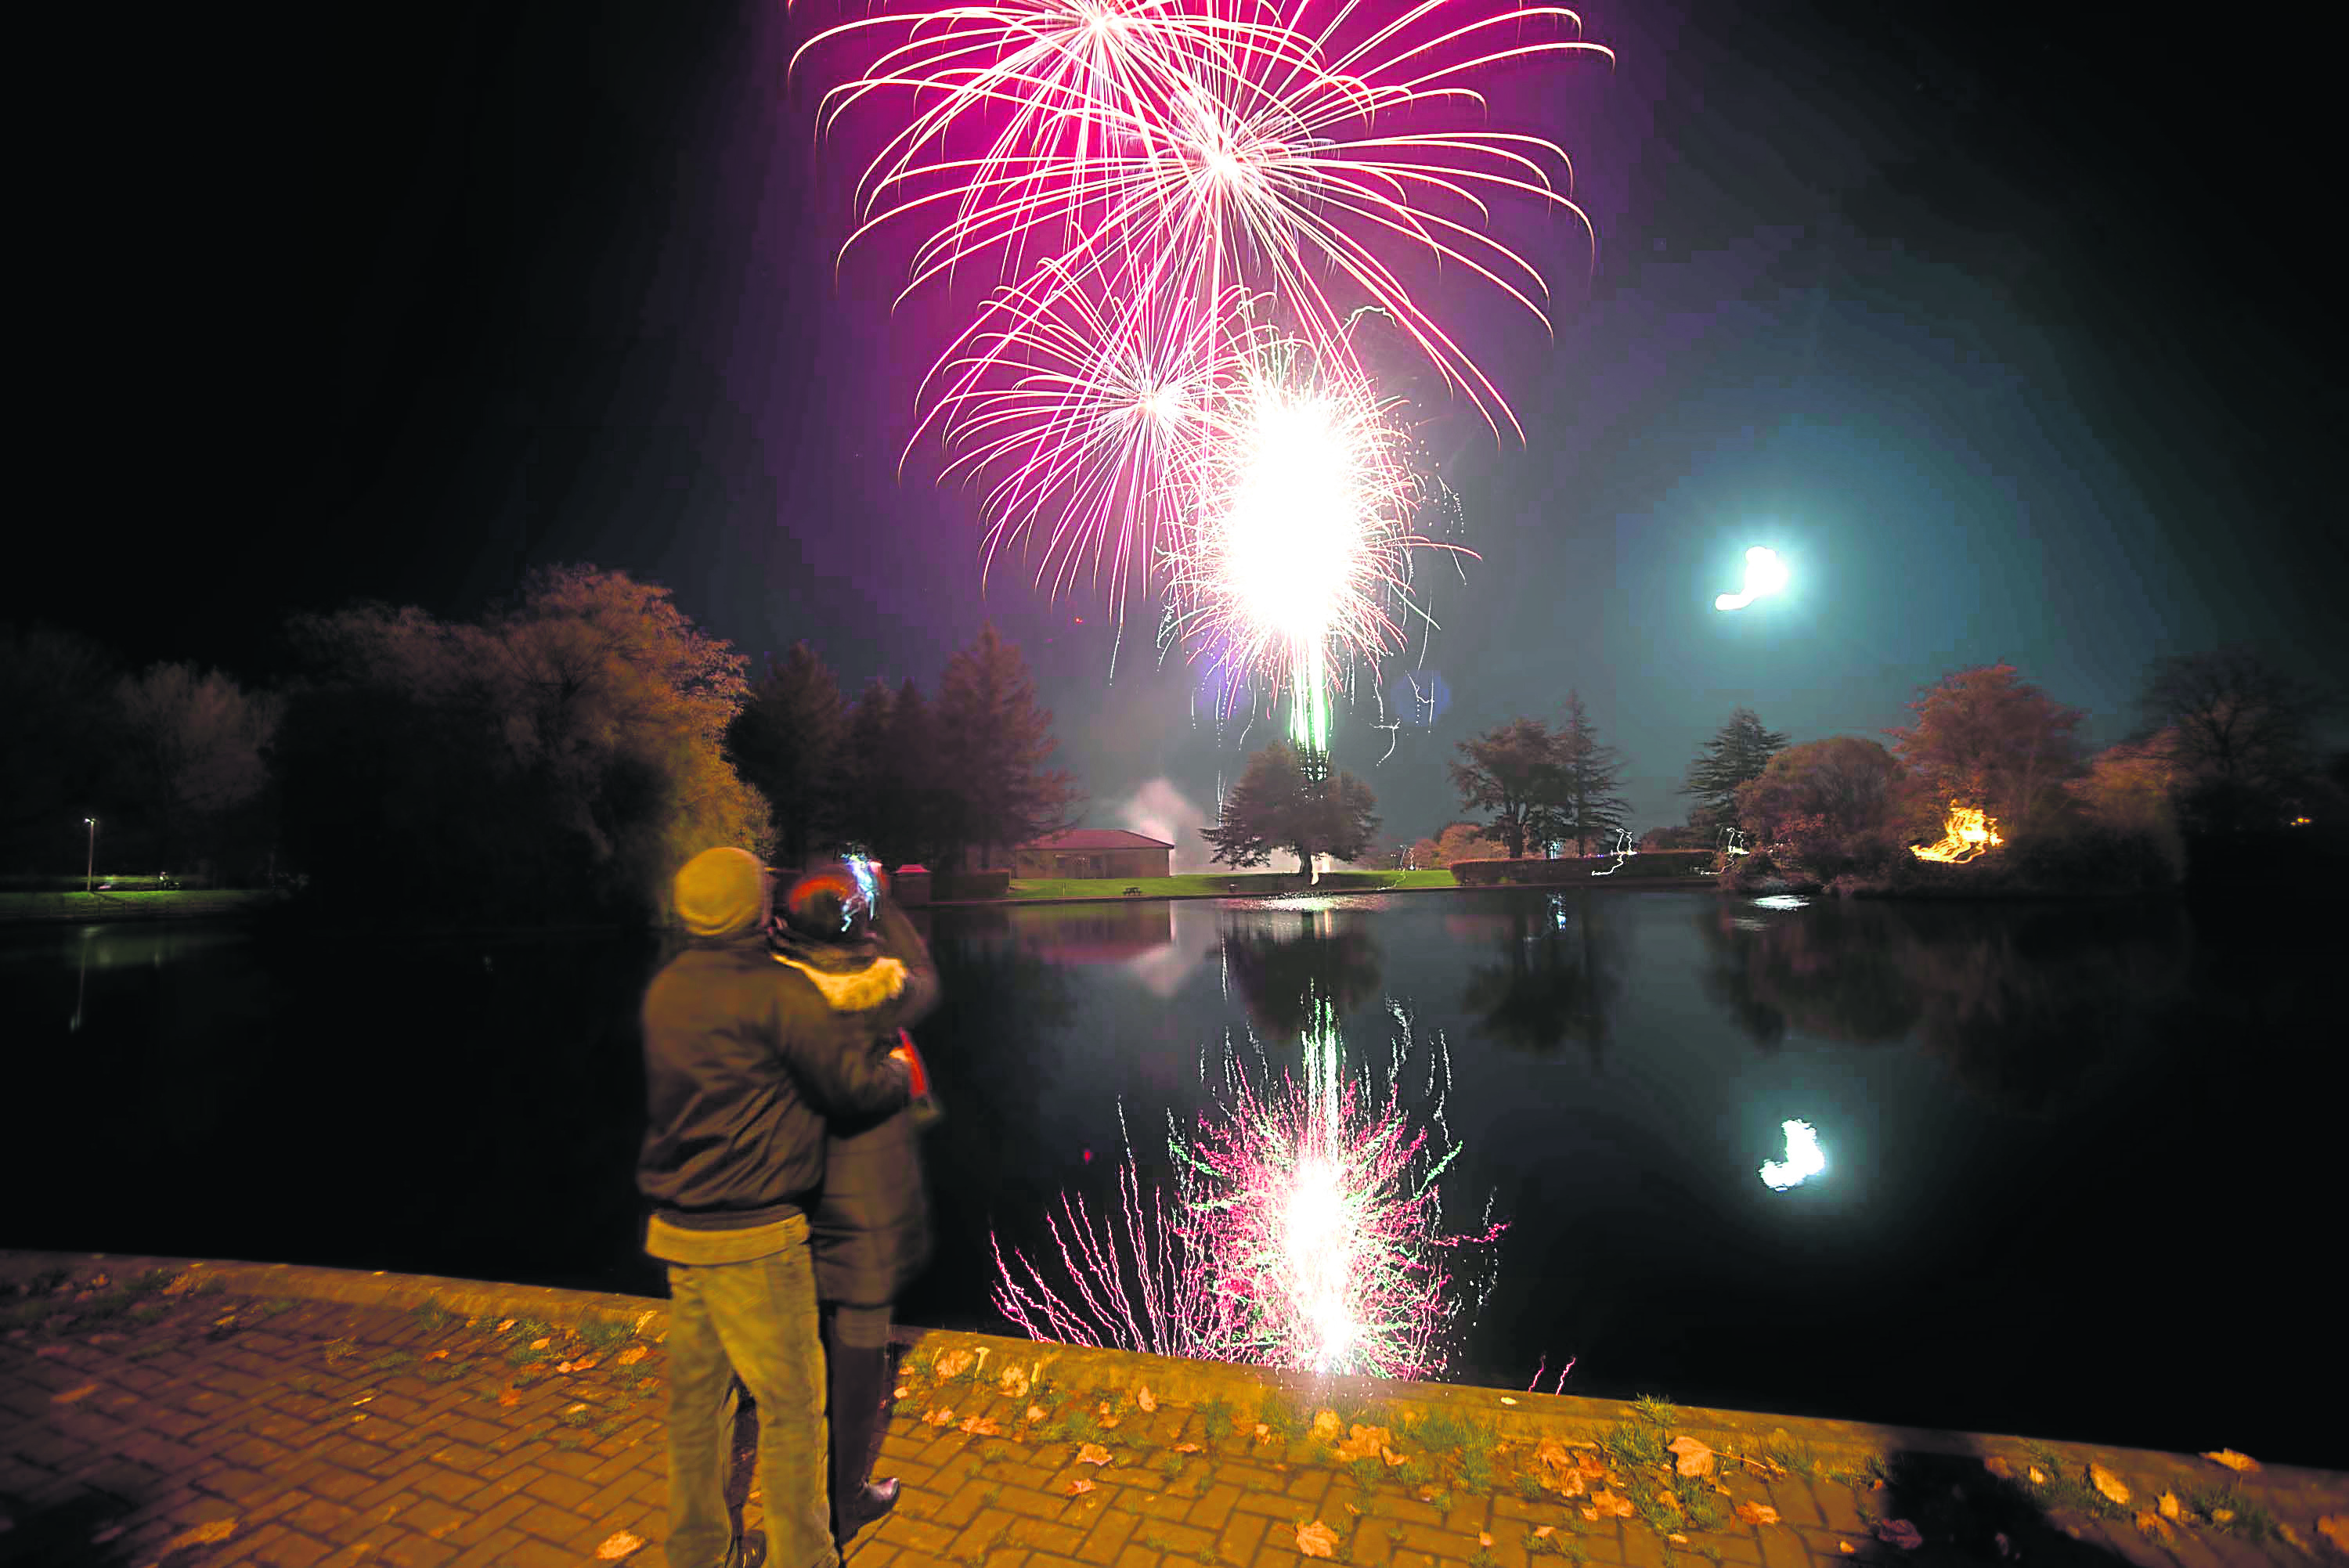 Elgin hosts its annual bonfire and fire works display at Cooper park